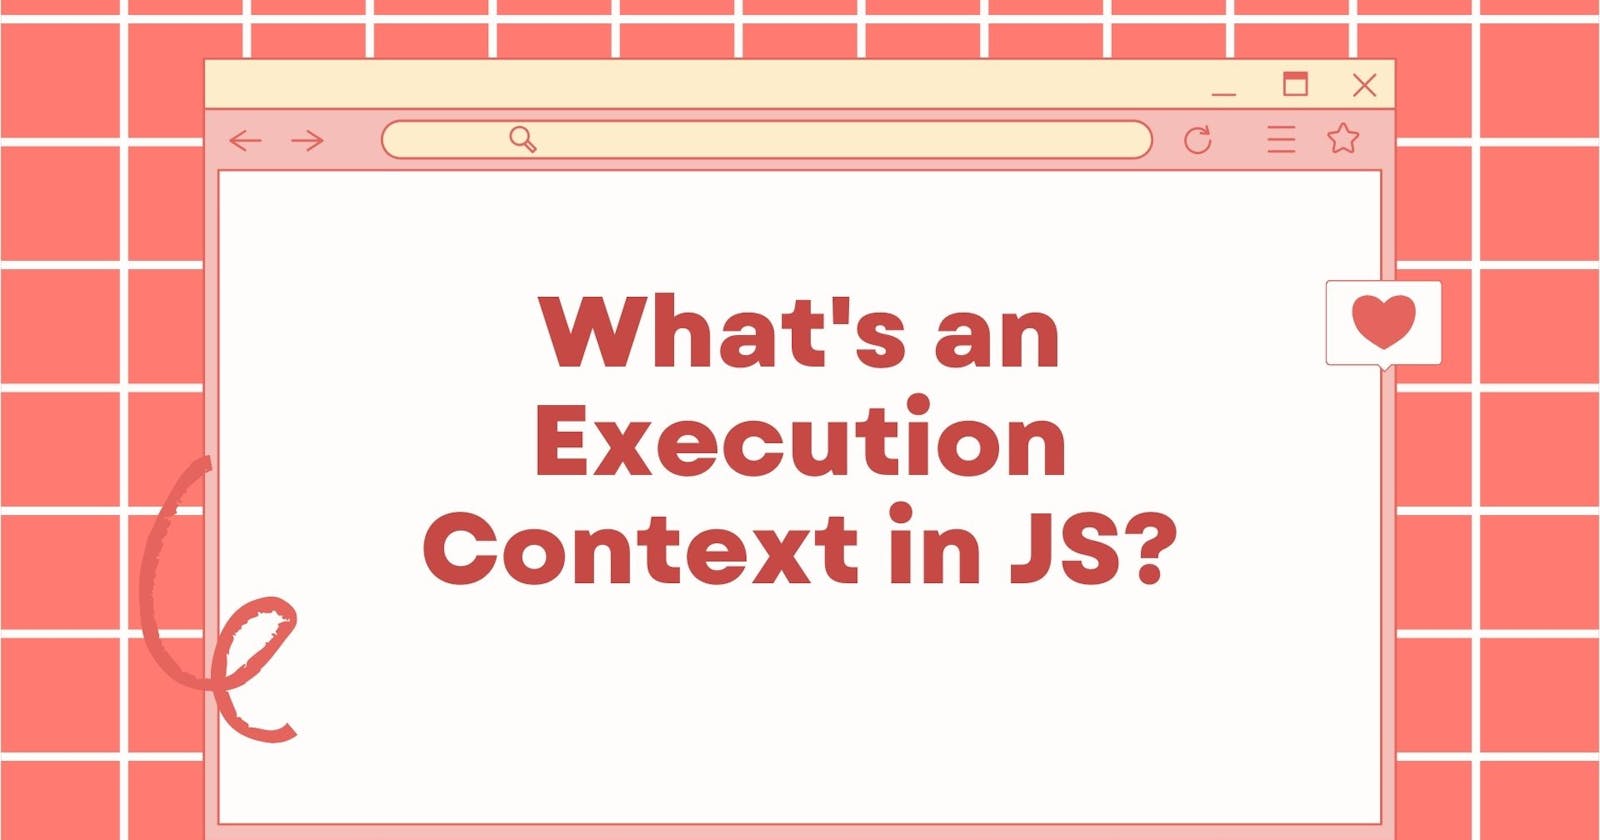 Execution Context in JS